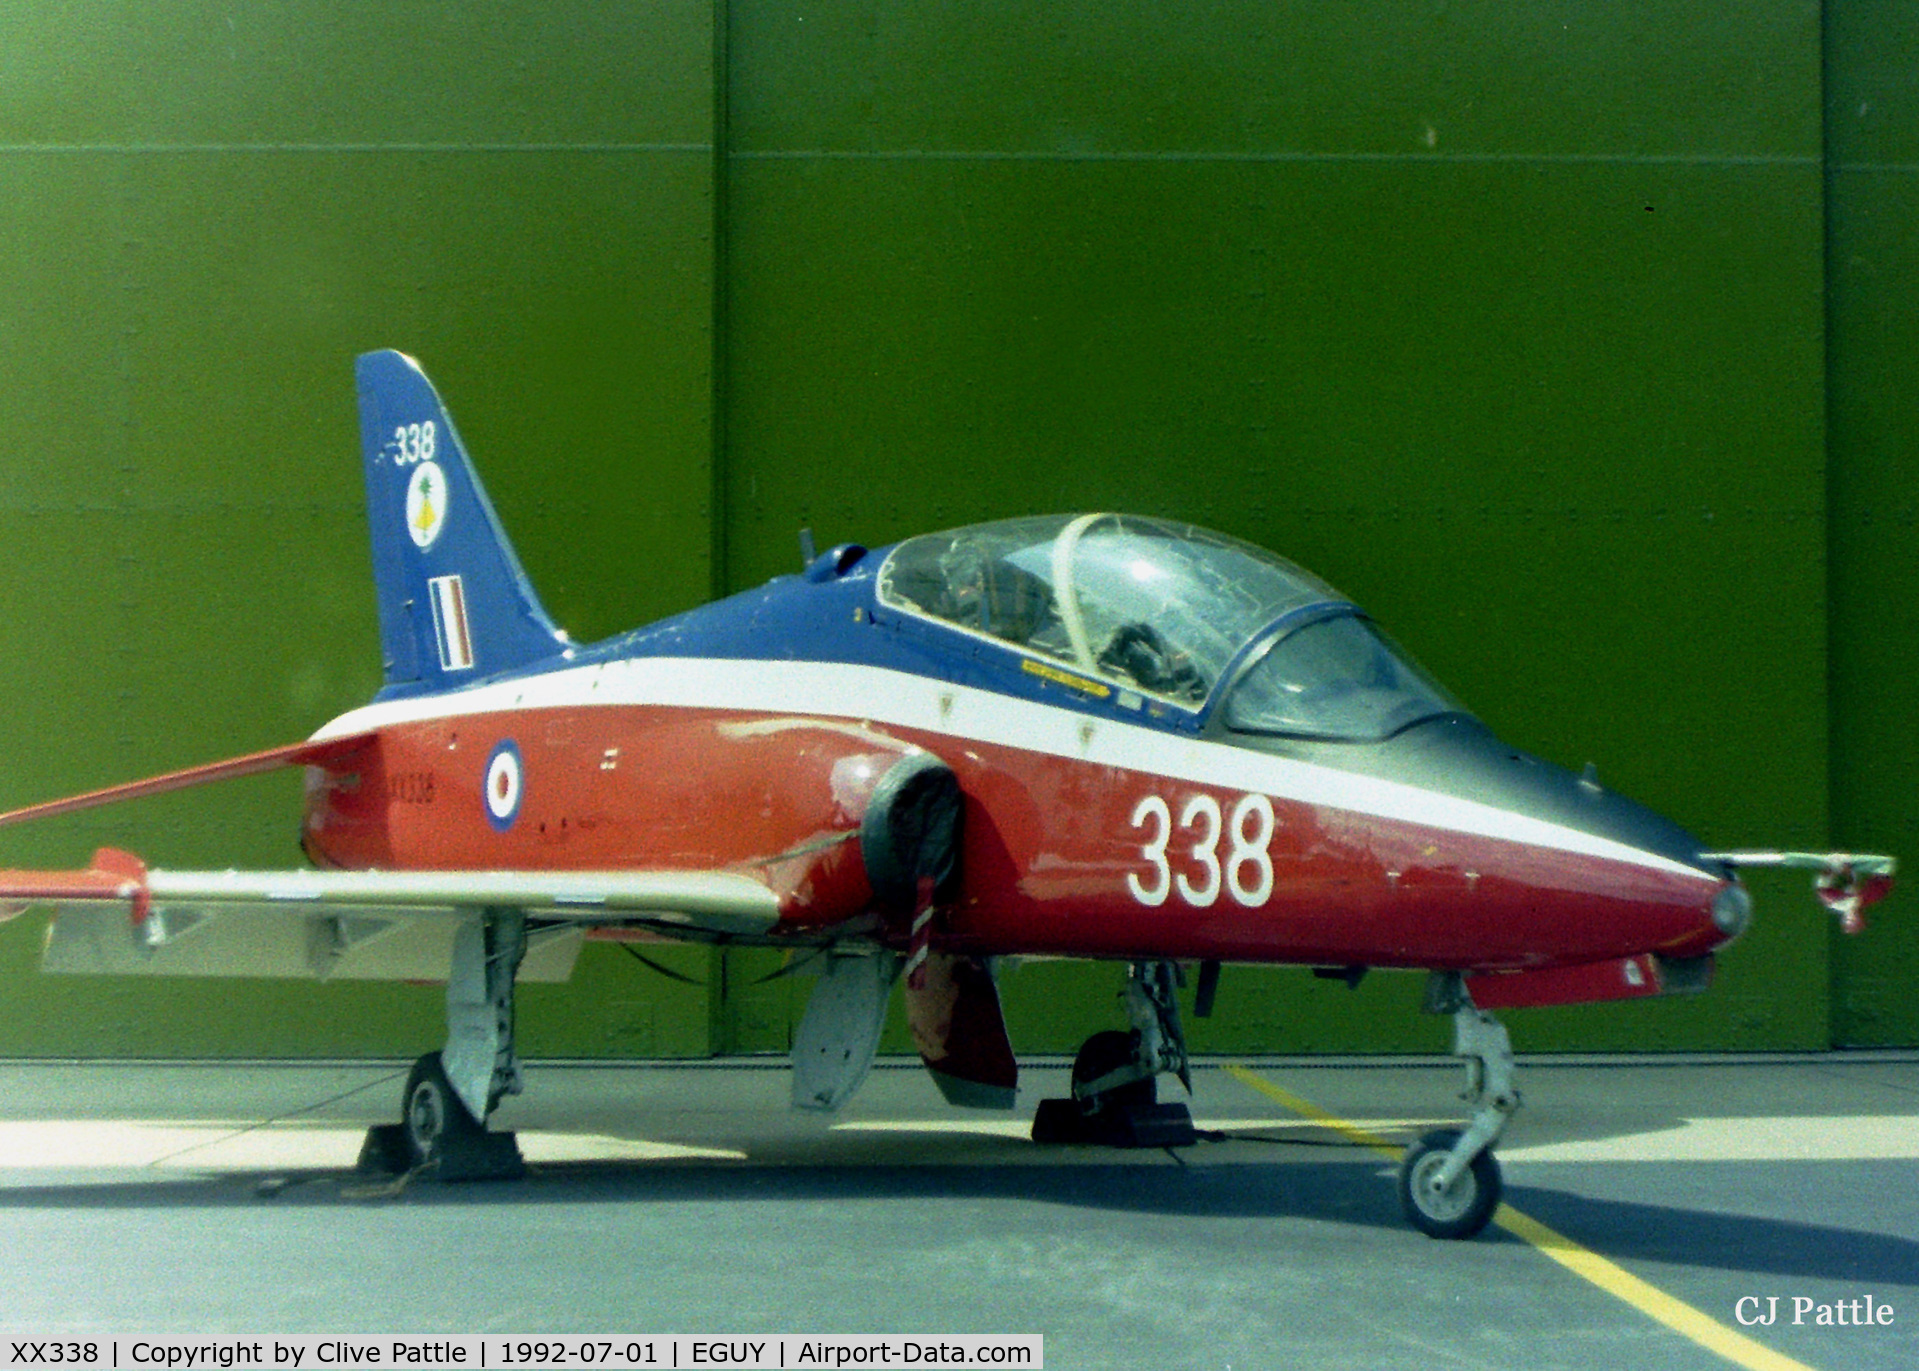 XX338, 1981 Hawker Siddeley Hawk T.1A C/N 187/312162, Pictured in its earliest colour scheme whilst visiting RAF Wyton in July 1992